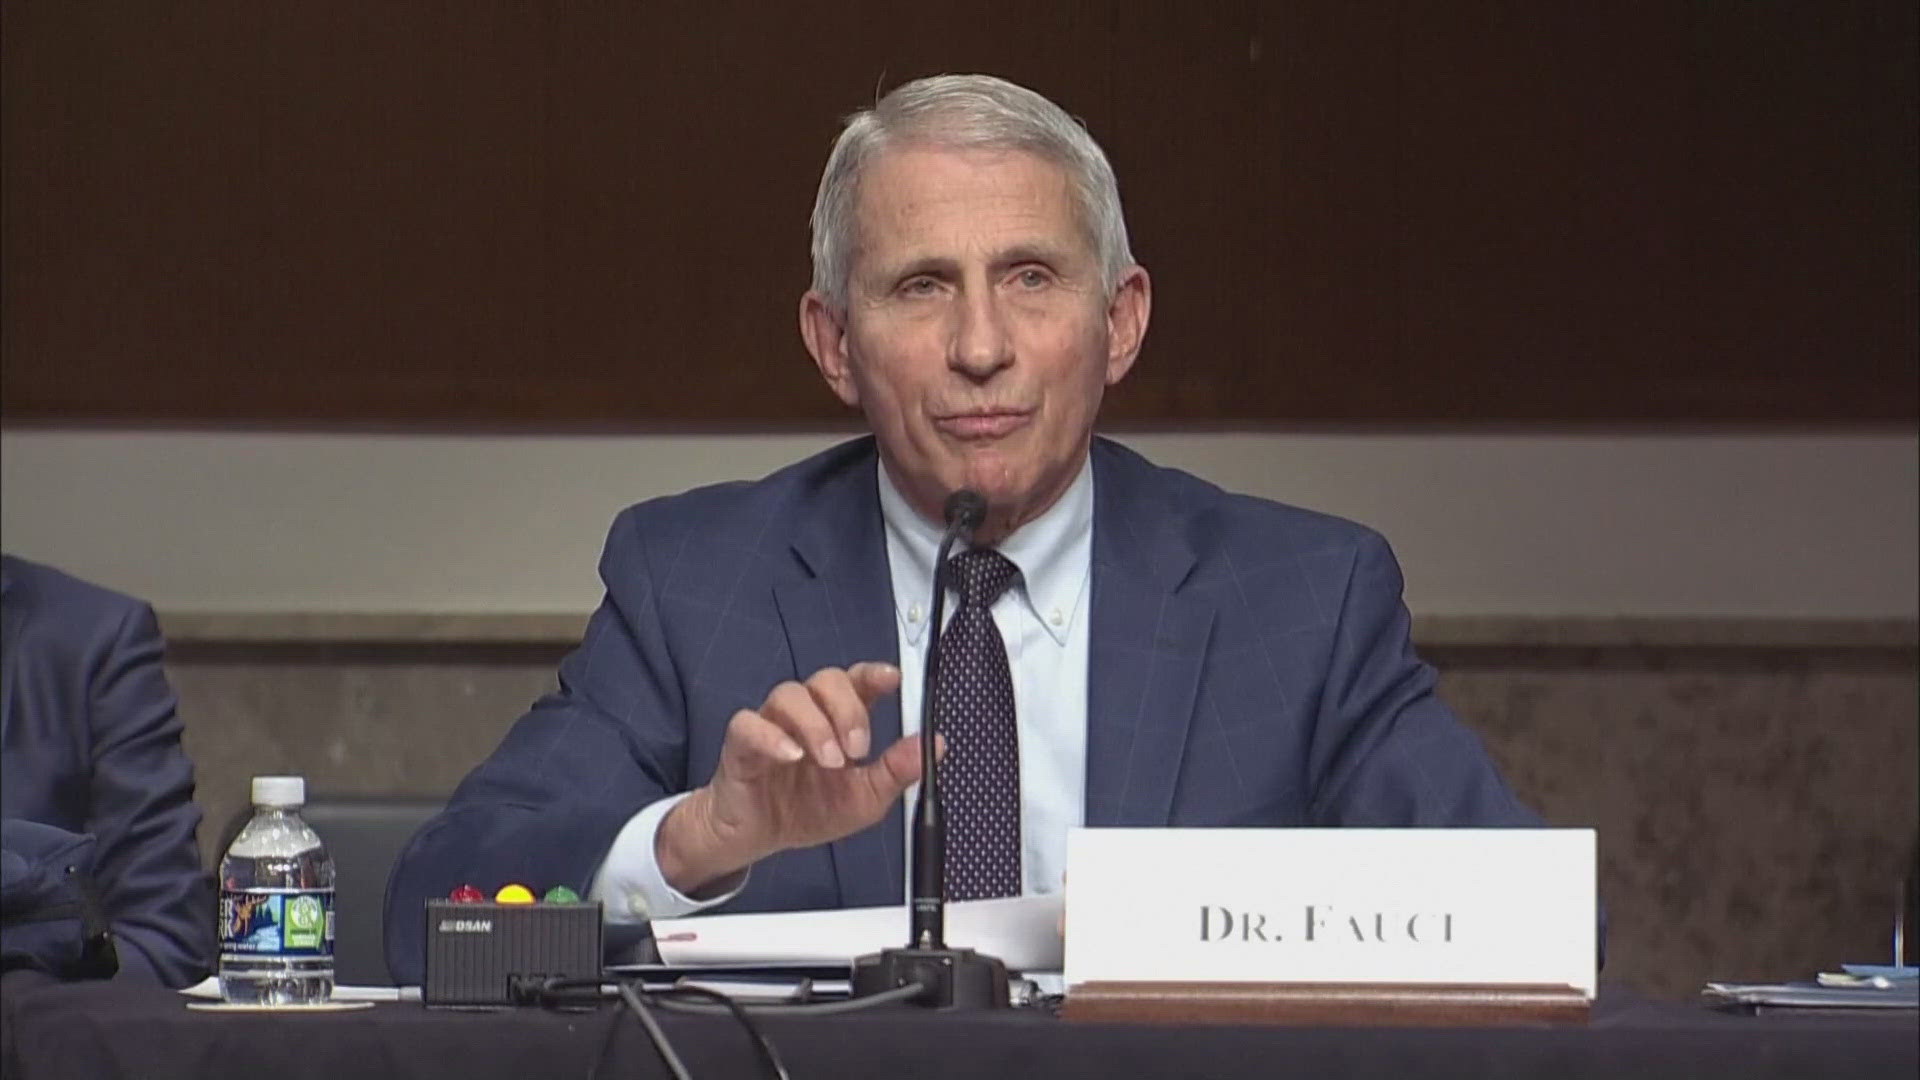 Dr. Anthony Fauci once served as chief medical advisor to the White House under President Joe Biden.